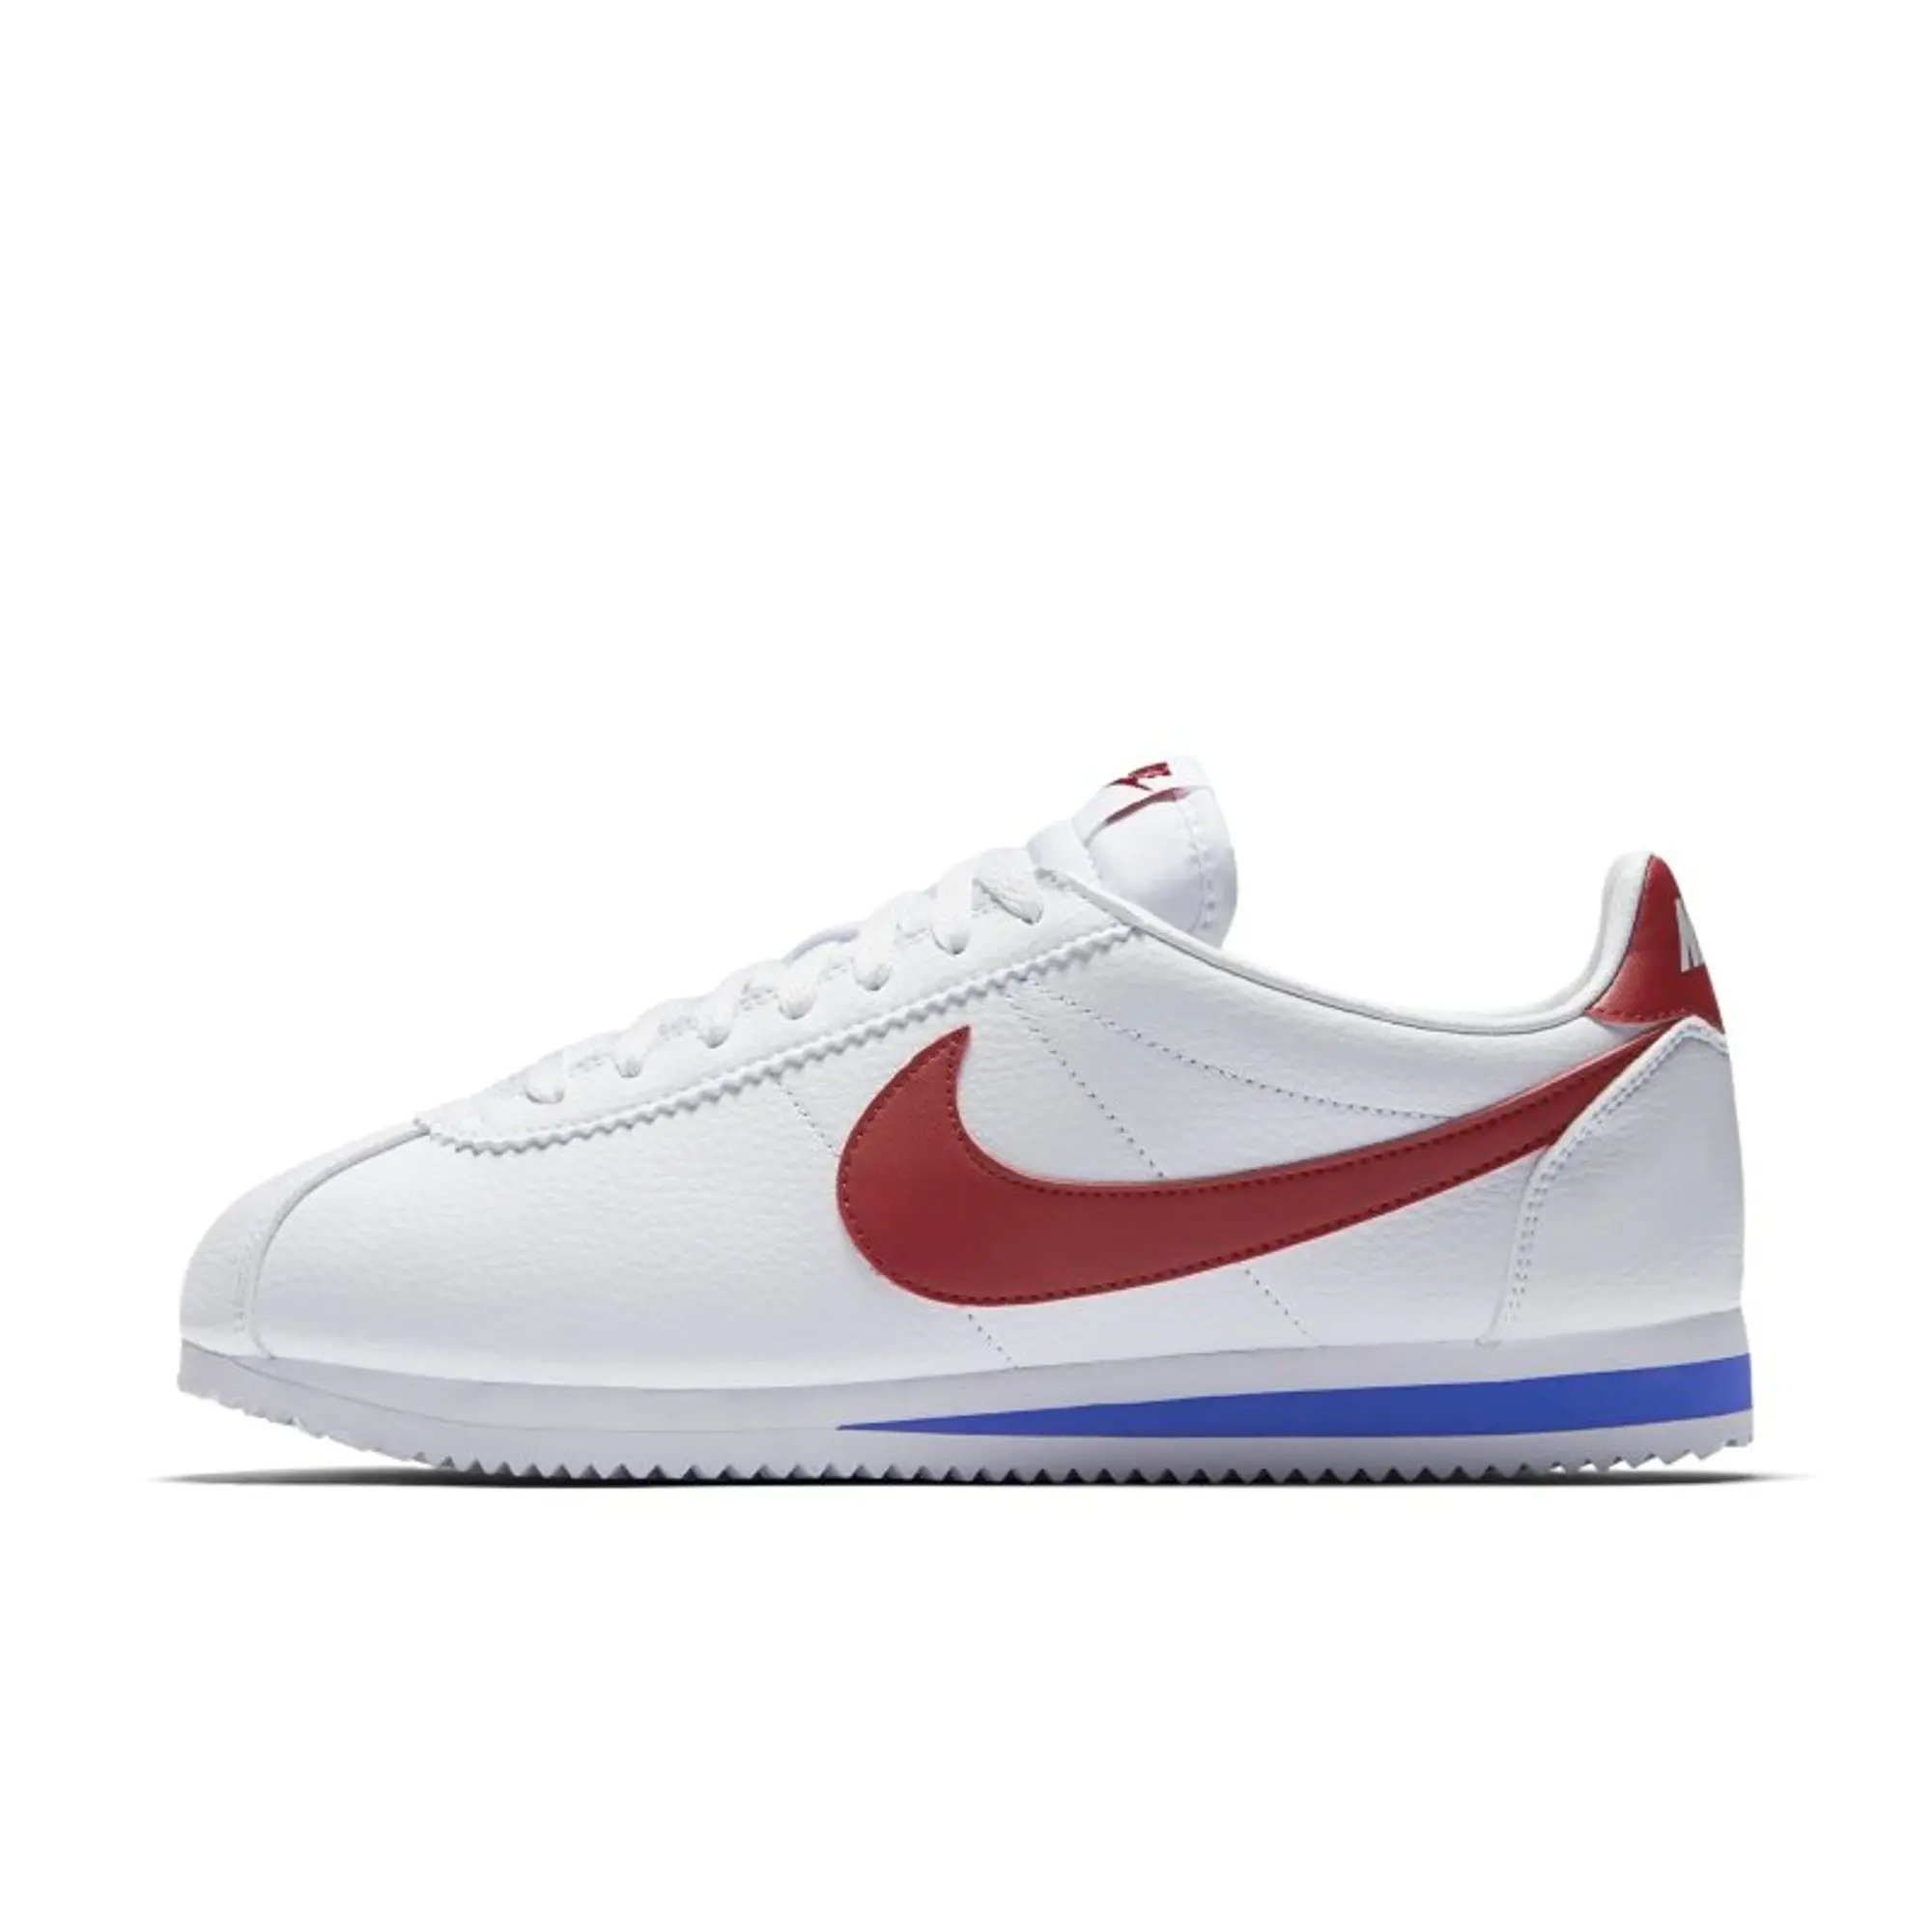 Nike Classic Cortez Leather Shoes